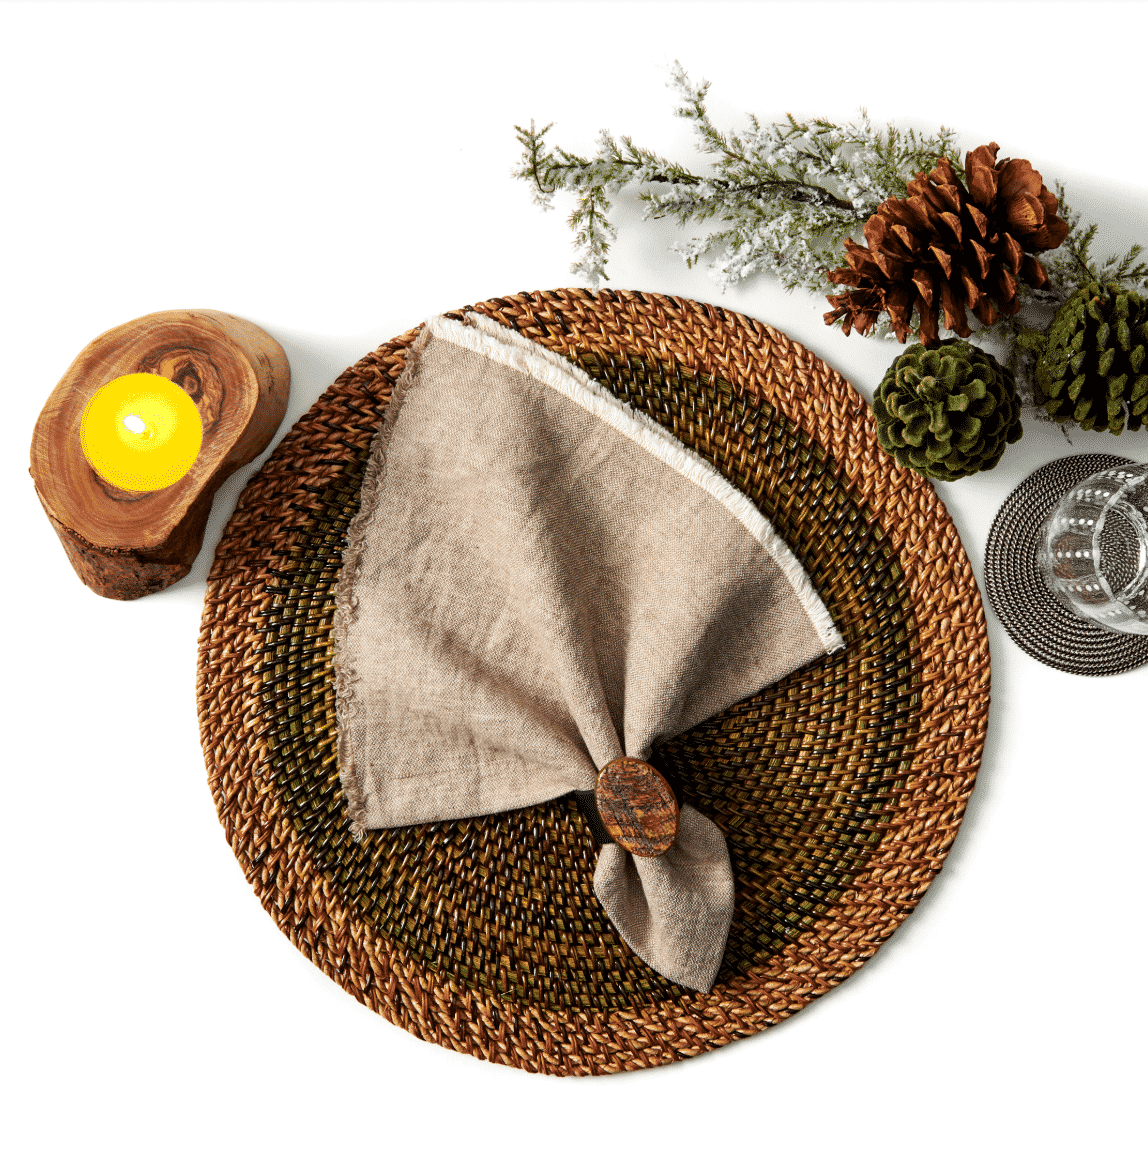 Shaded Rattan Round Placemat